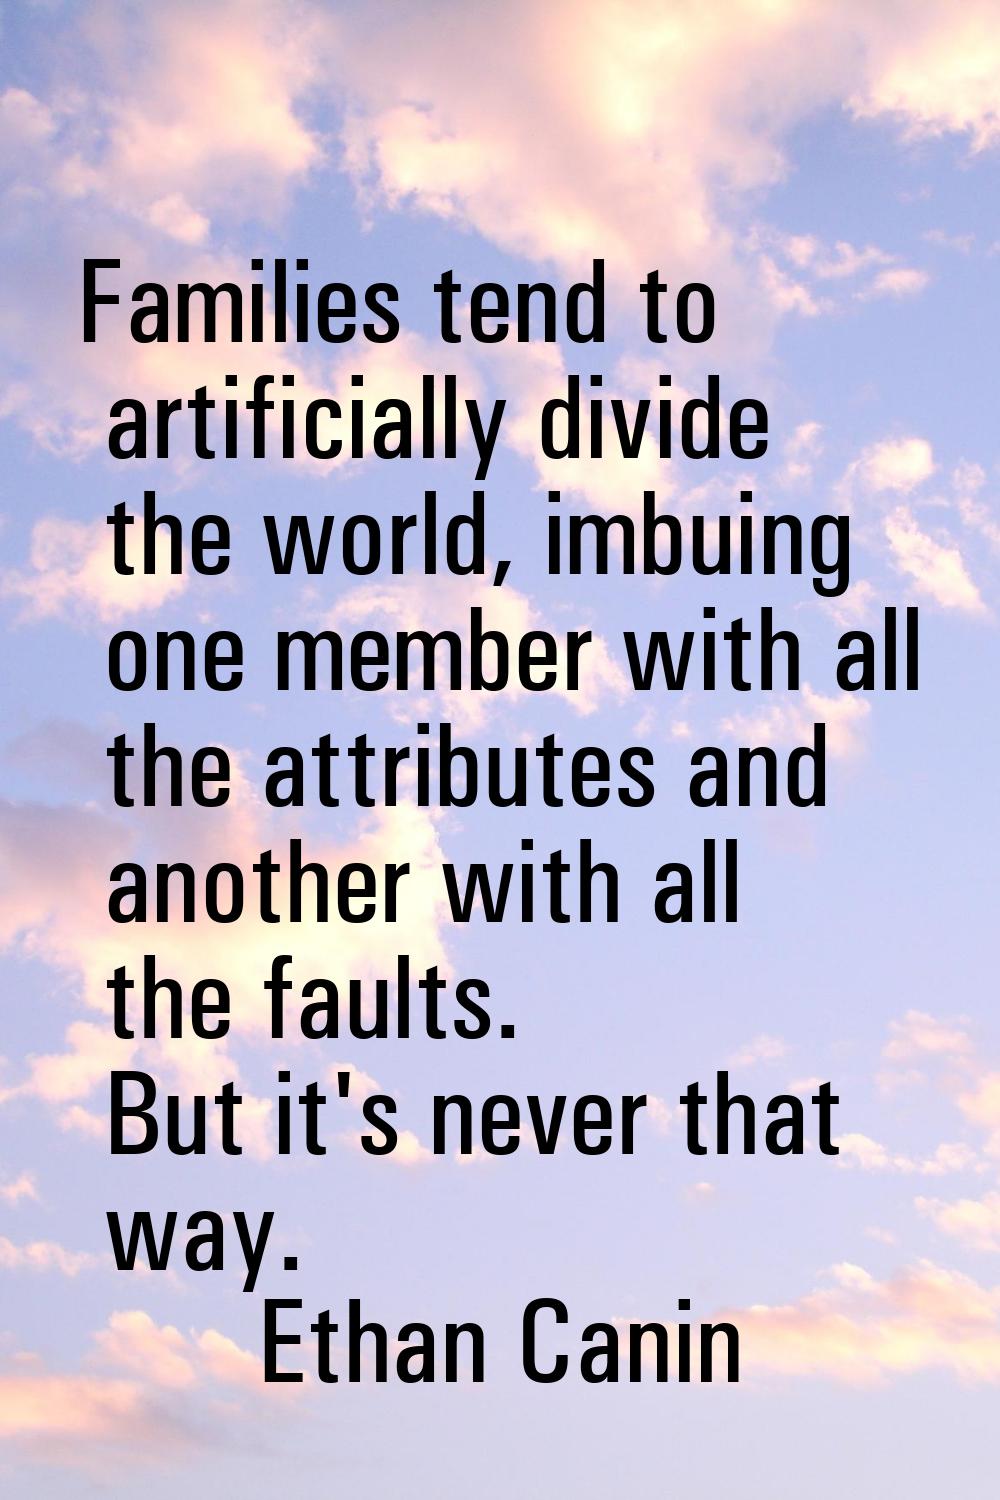 Families tend to artificially divide the world, imbuing one member with all the attributes and anot